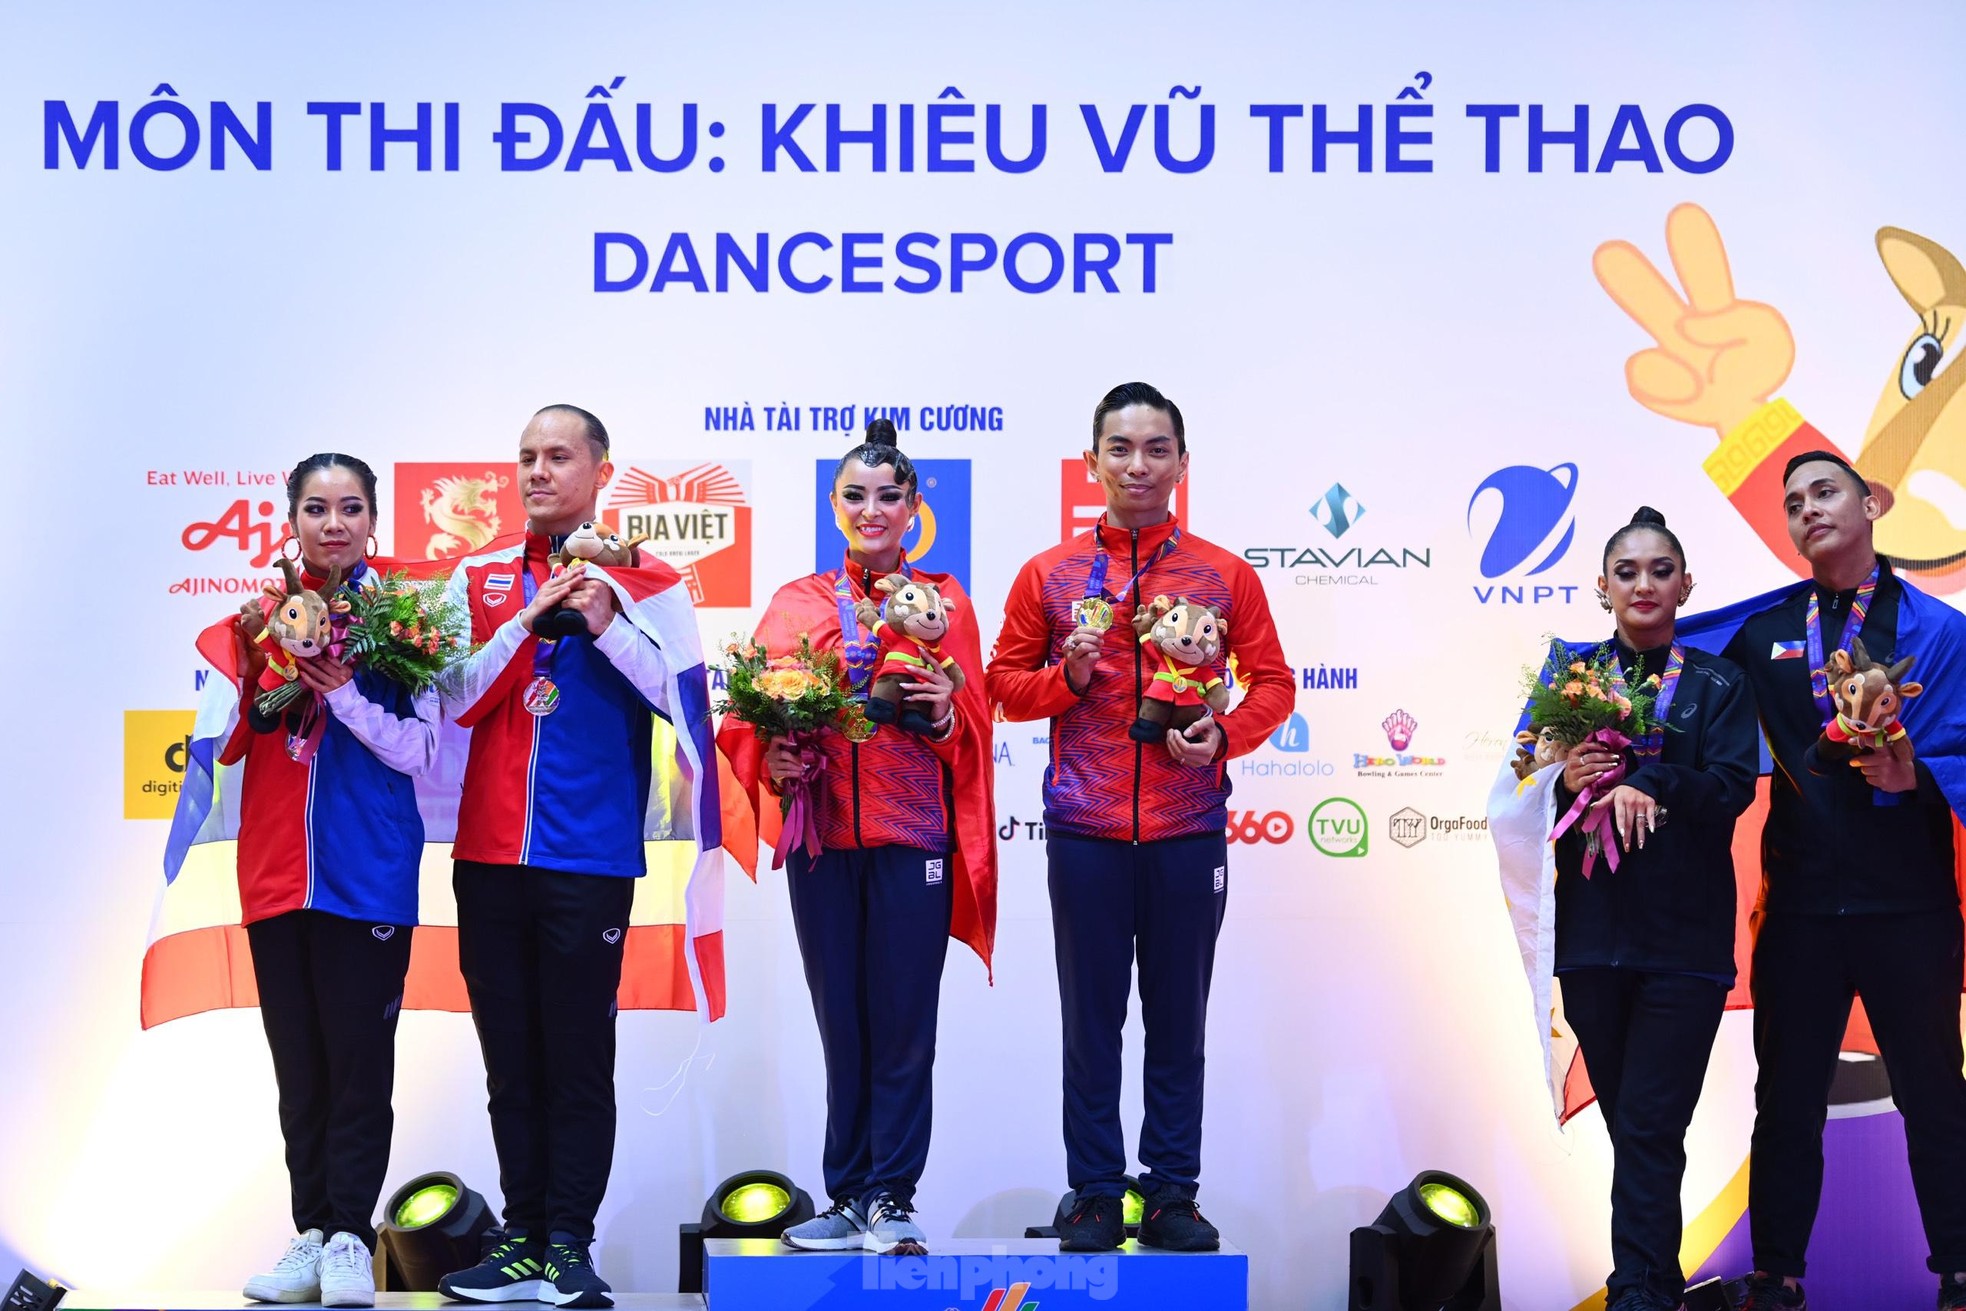 Watch the mesmerizing dance that helped Dancesport Vietnam win 5 gold medals at the 31st SEA Games - Photo 13.